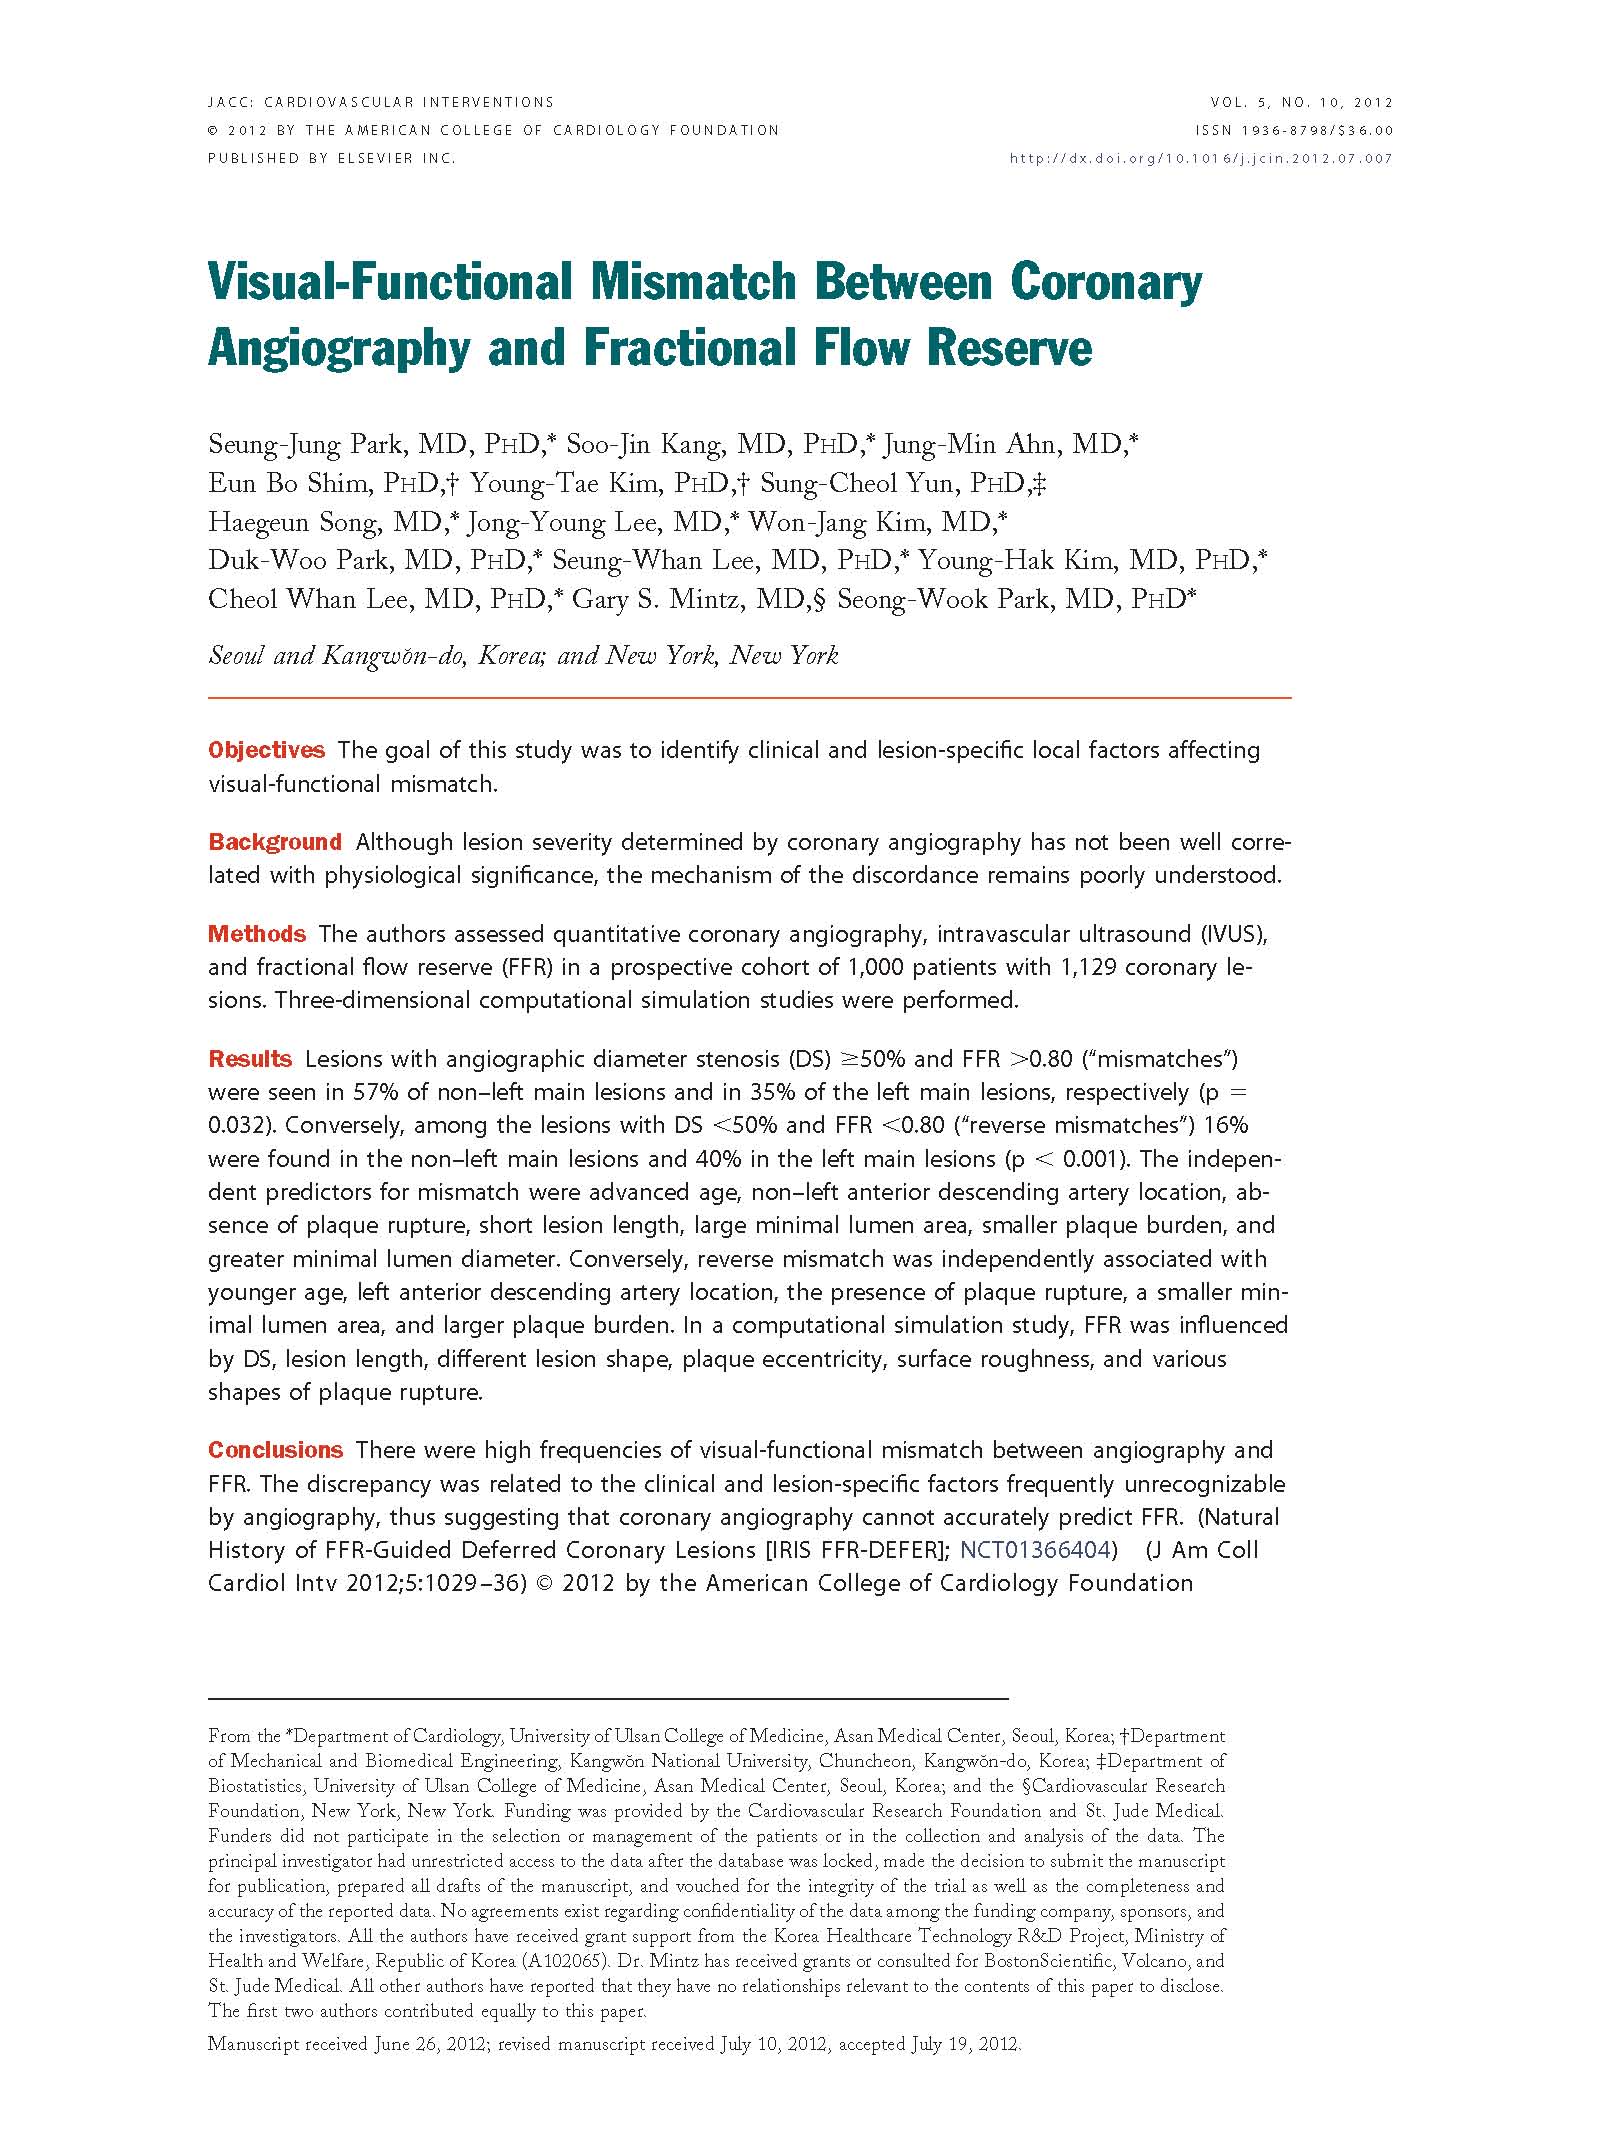 Visual-functional mismatch between coronary angiography and fractional flow reserve.jpg 1600X2150